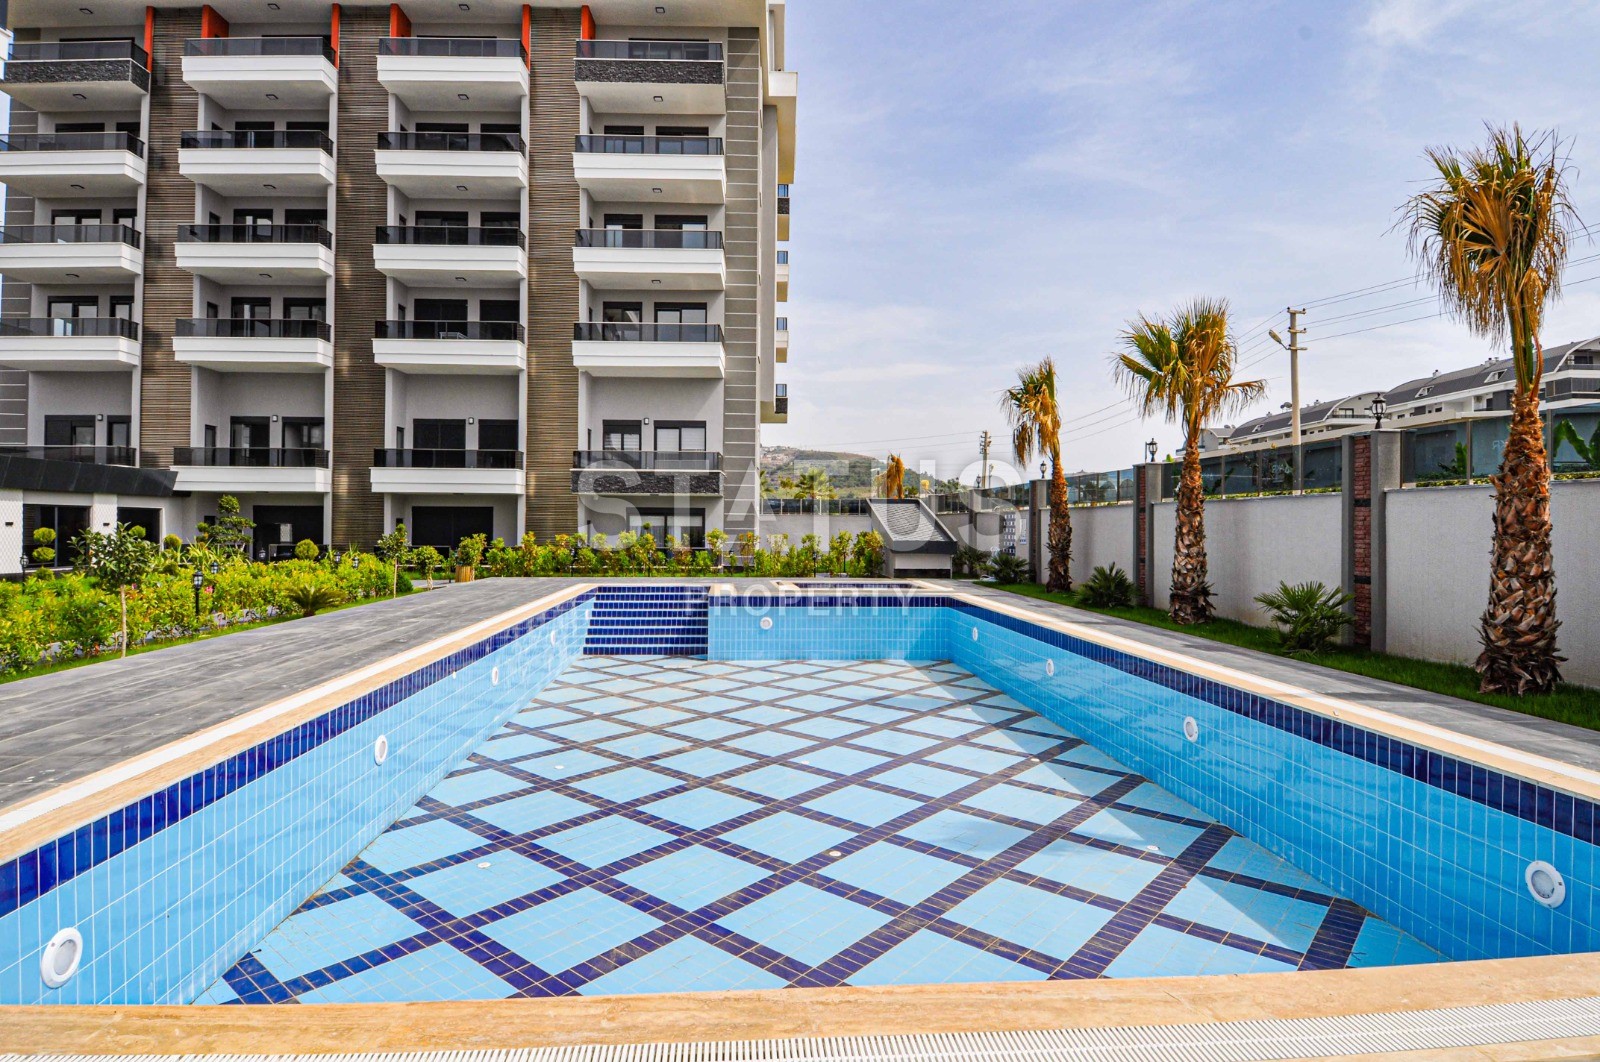 Duplex furnished apartment 2+1, 106m2 with access to the garden. Kargicak, Alanya. фото 1